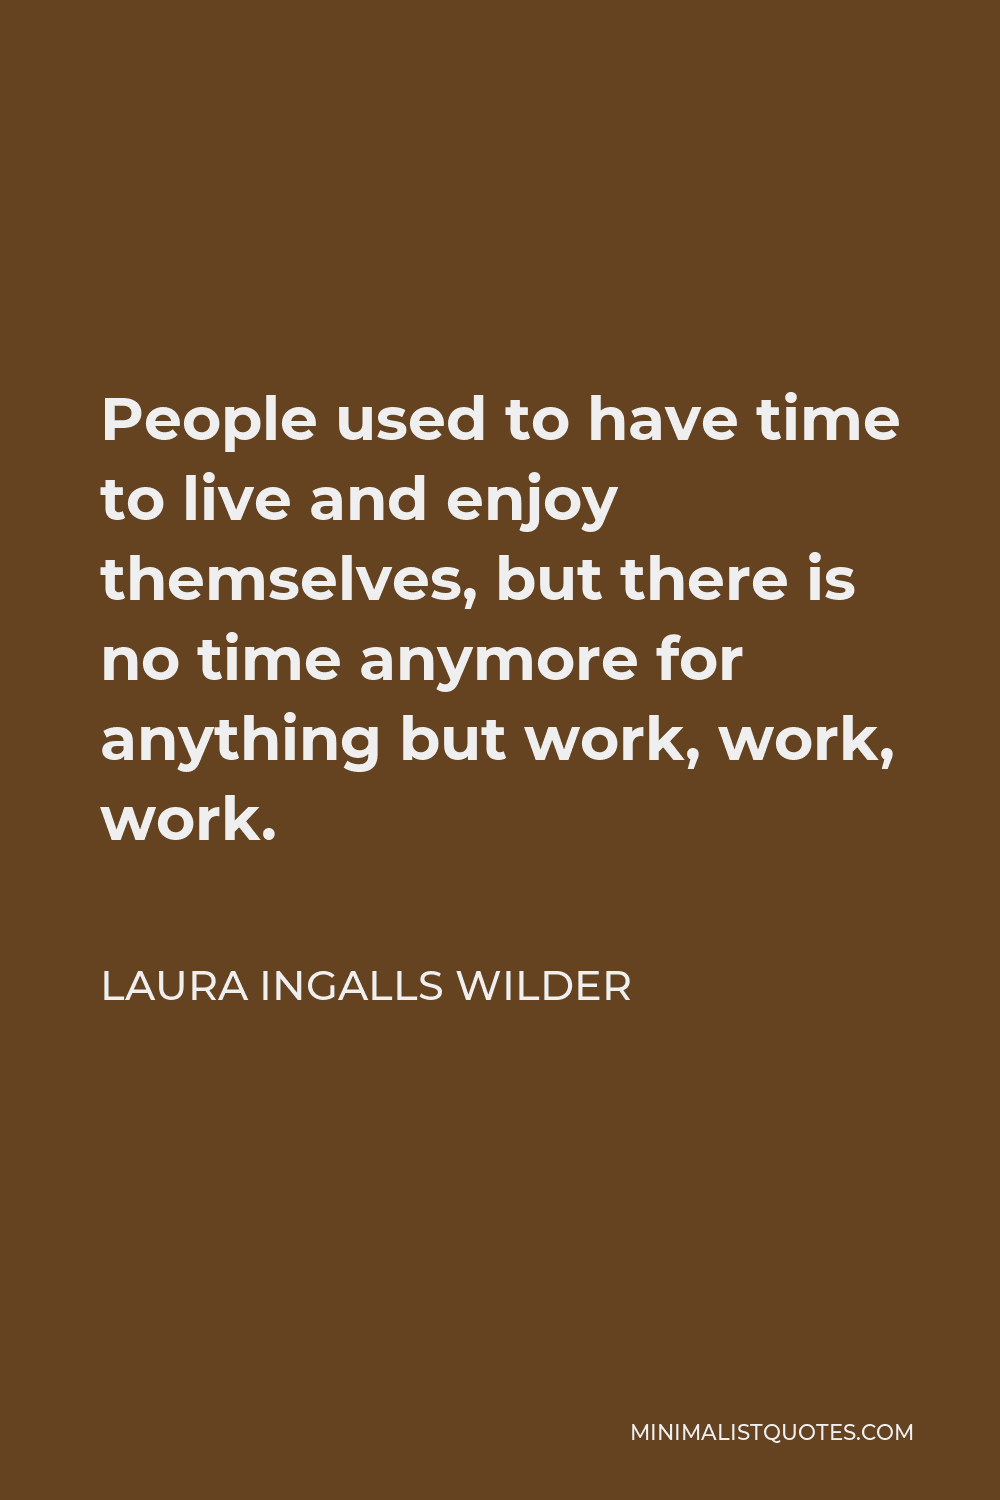 Laura Ingalls Wilder Quote - People used to have time to live and enjoy themselves, but there is no time anymore for anything but work, work, work.